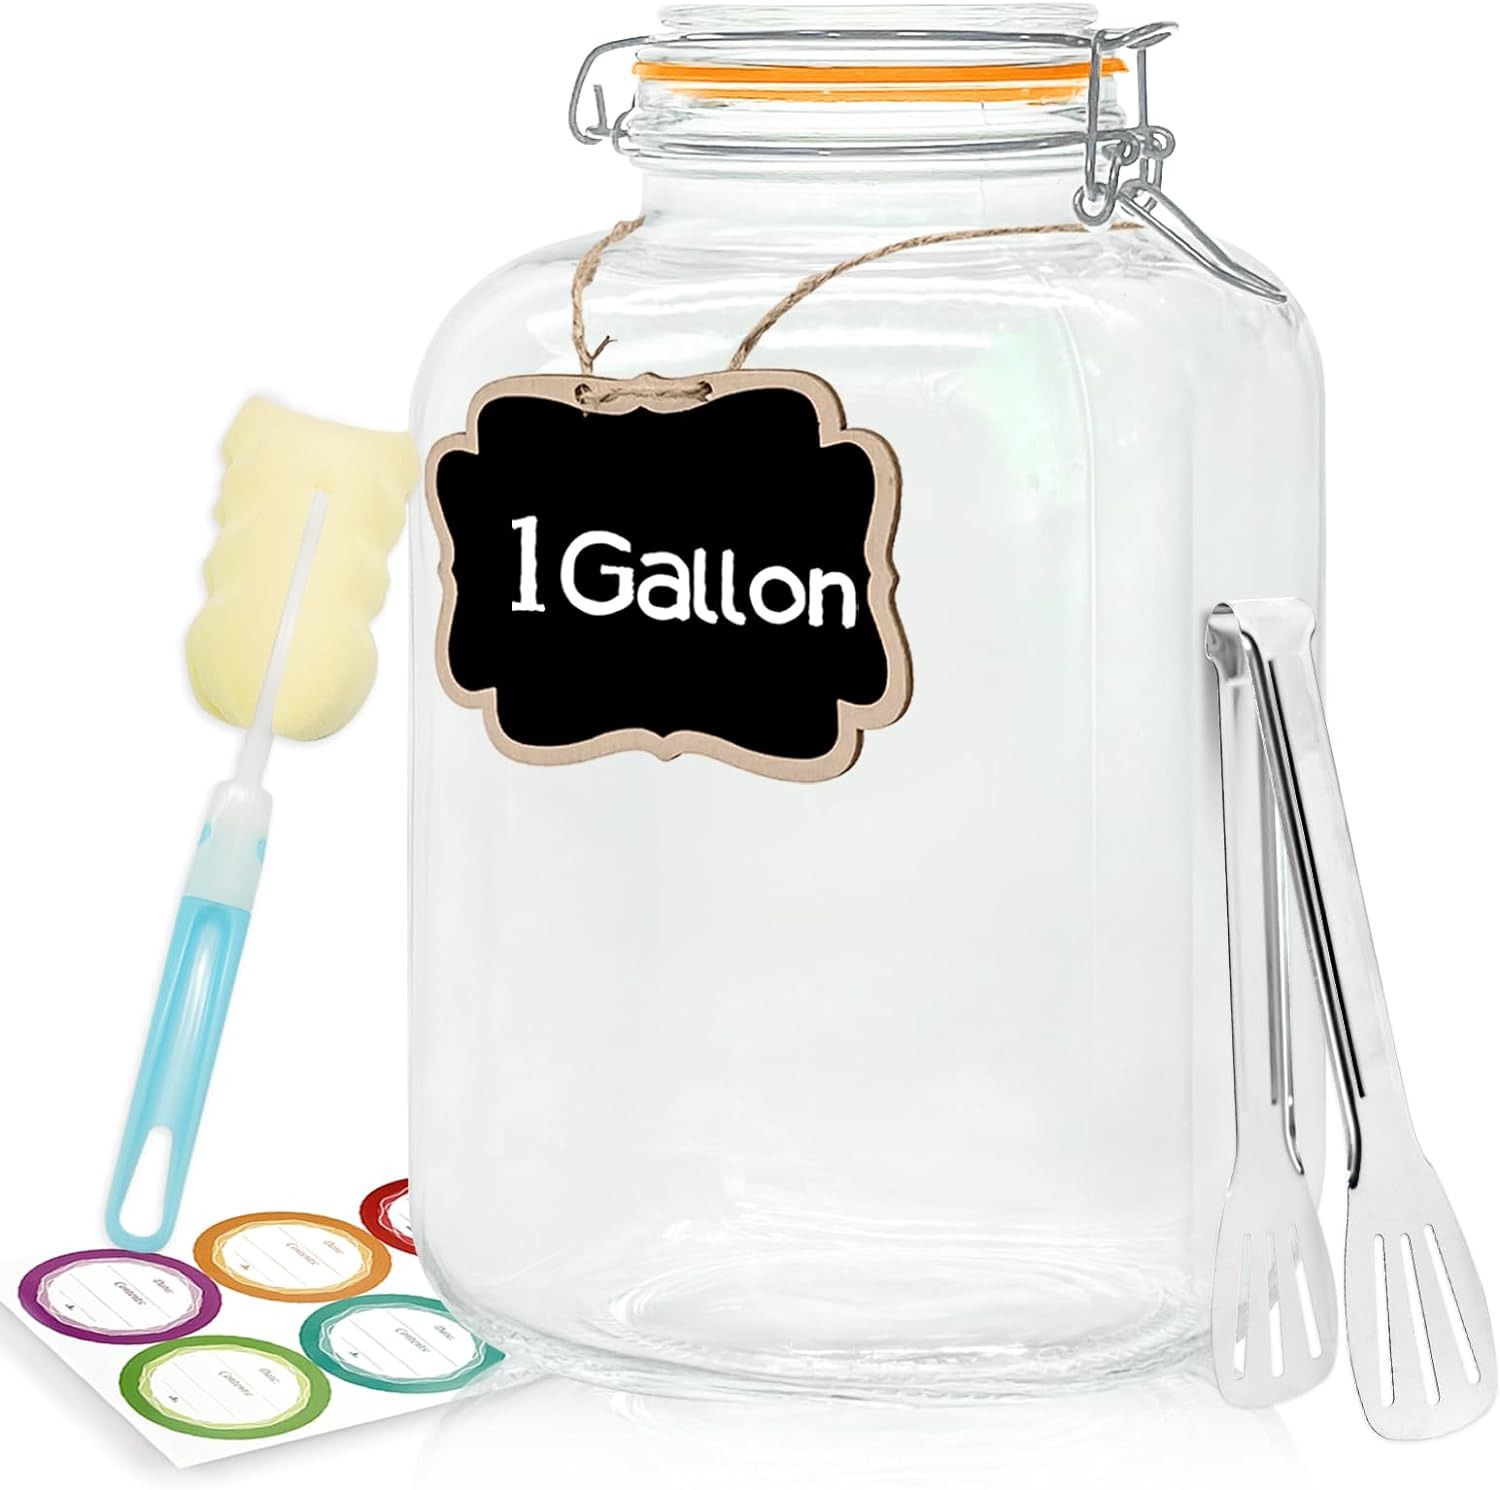 5 Pack 128Oz Glass Jars with Airtight Lids,1 Gallon Large Wide Mouth Glass Mason